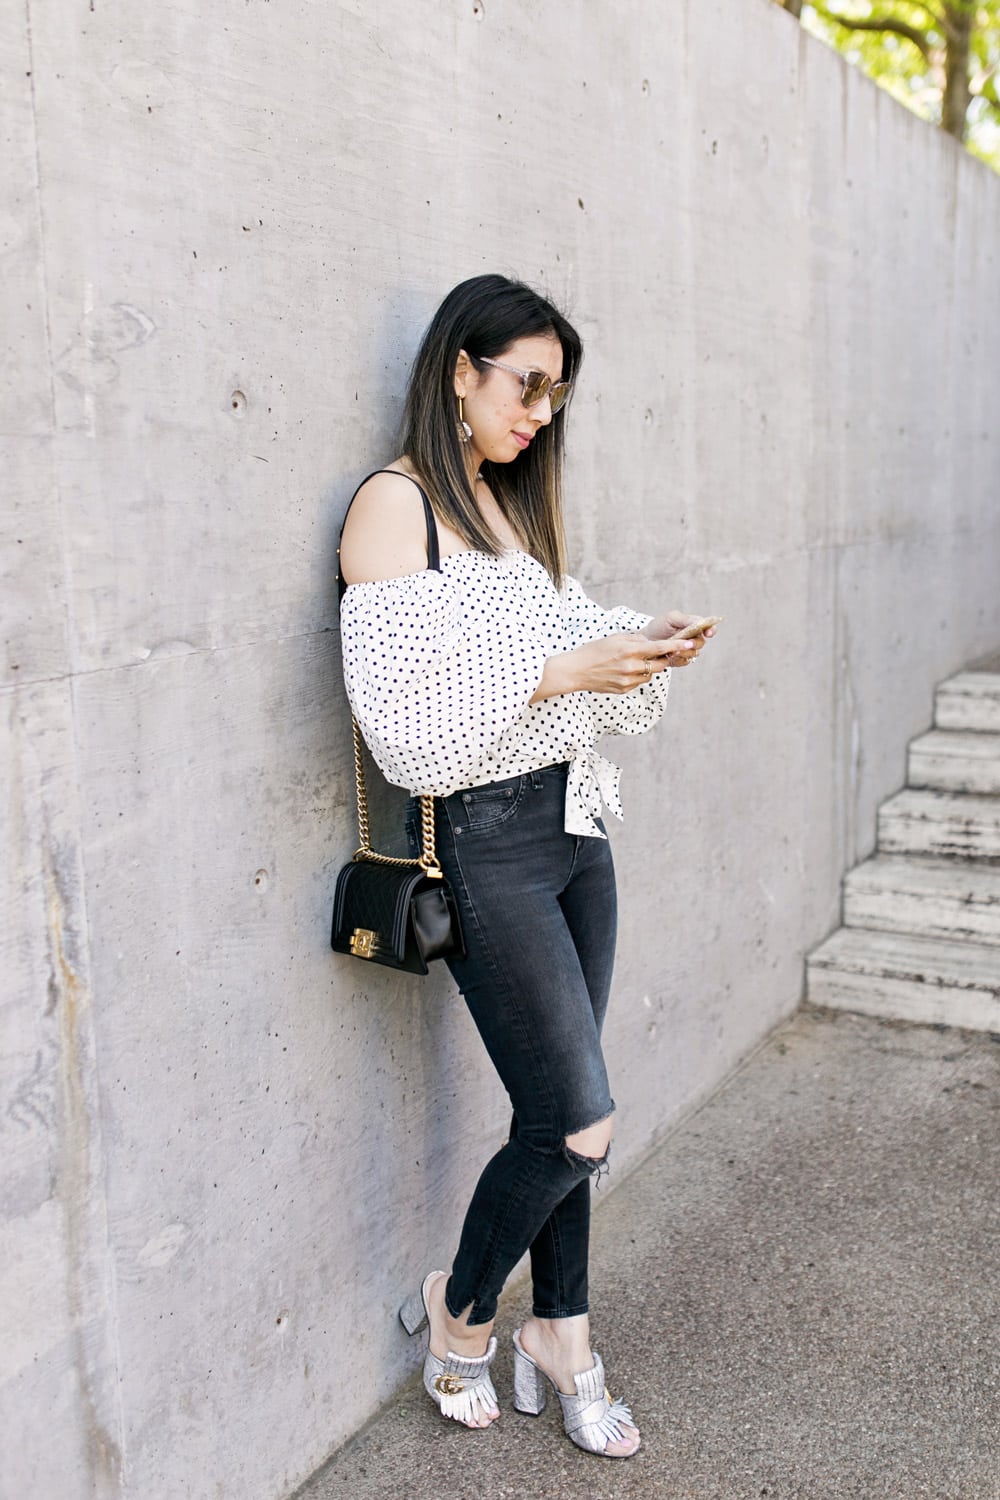 polka dot puff sleeve off the shoulder top with lele sadoughi plumeria drop earrings, rag and bone slit capri jeans in steel, gucci silver marmont mules and chanel boy bag